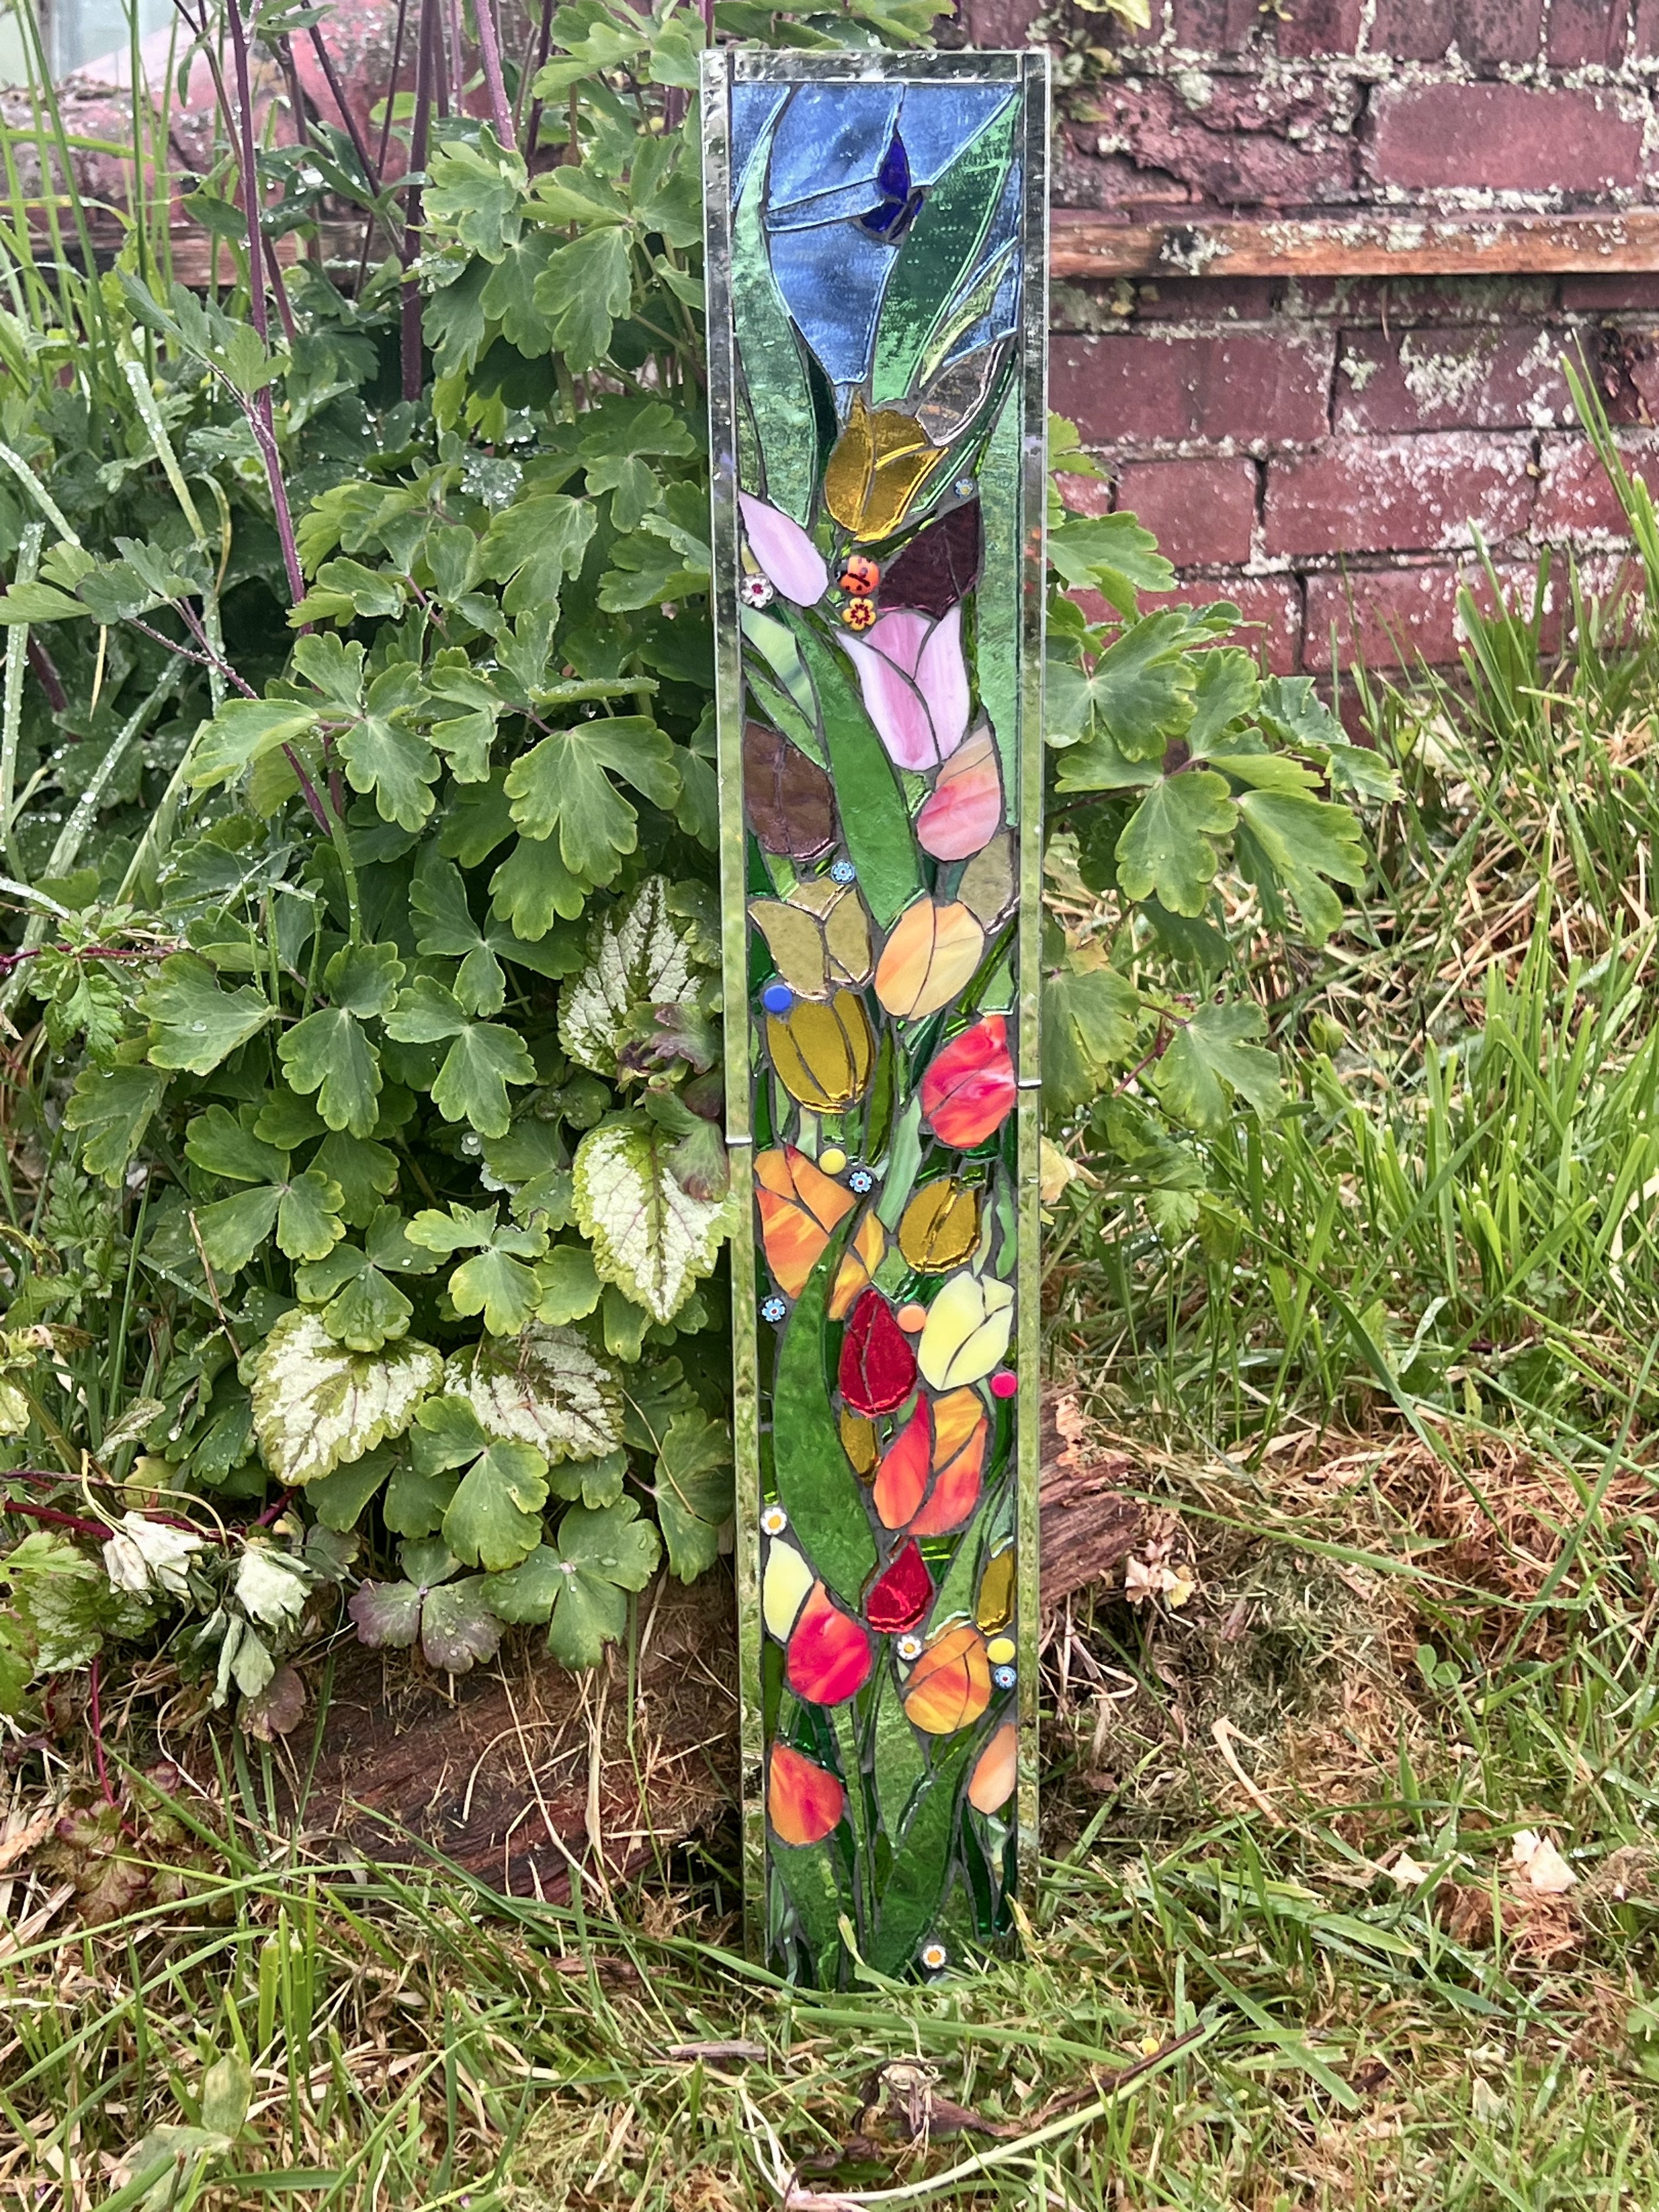 Stained Glass Garden Mosaic - 1 Day